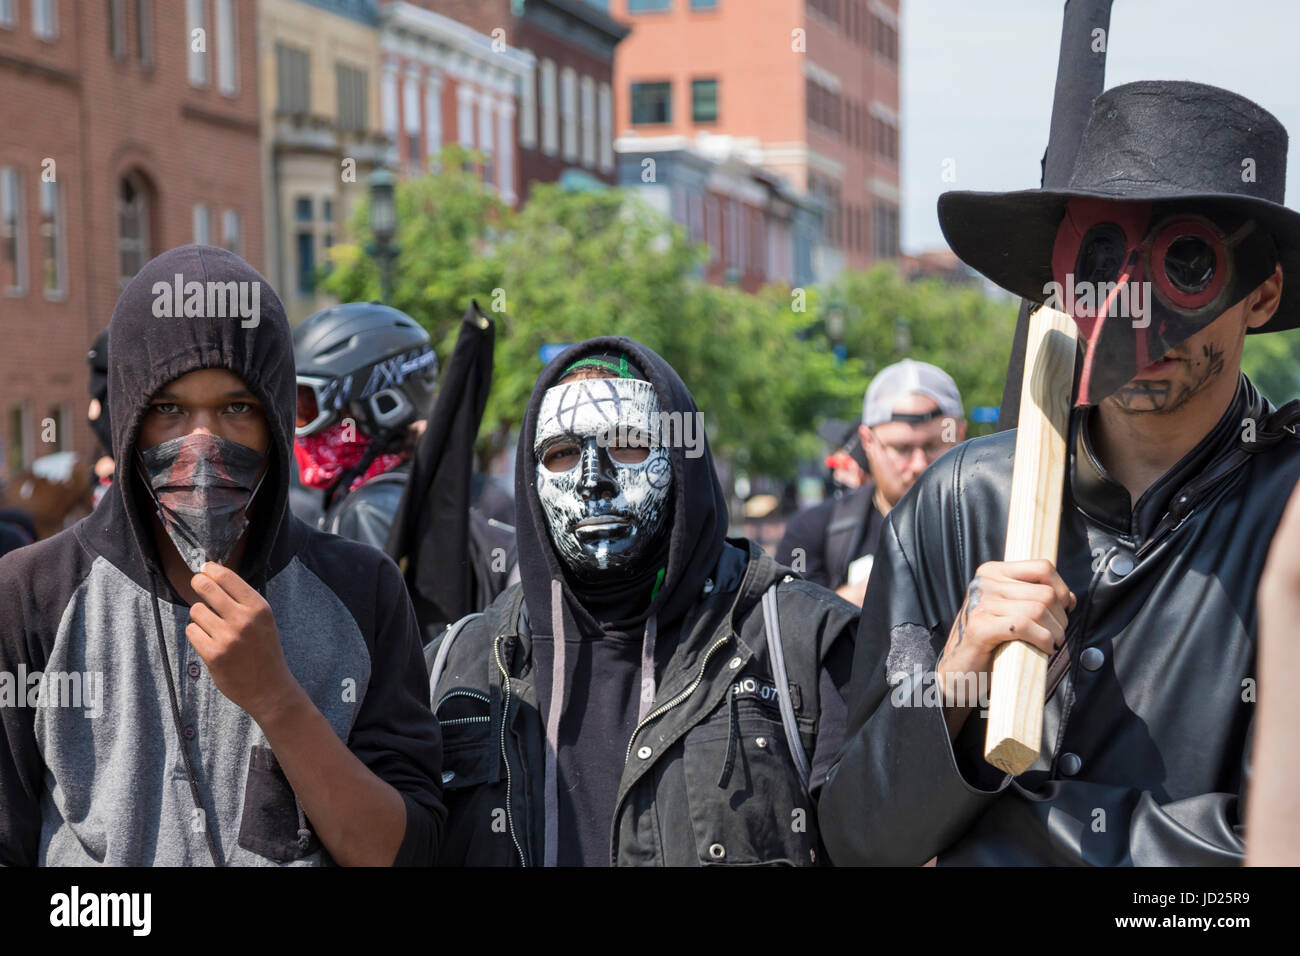 Harrisburg, Pennsylvania - Black Bloc anarchists counter-demonstrate against an anti-Muslim, anti-sharia rally organized by ACT for America at the Pen Stock Photo